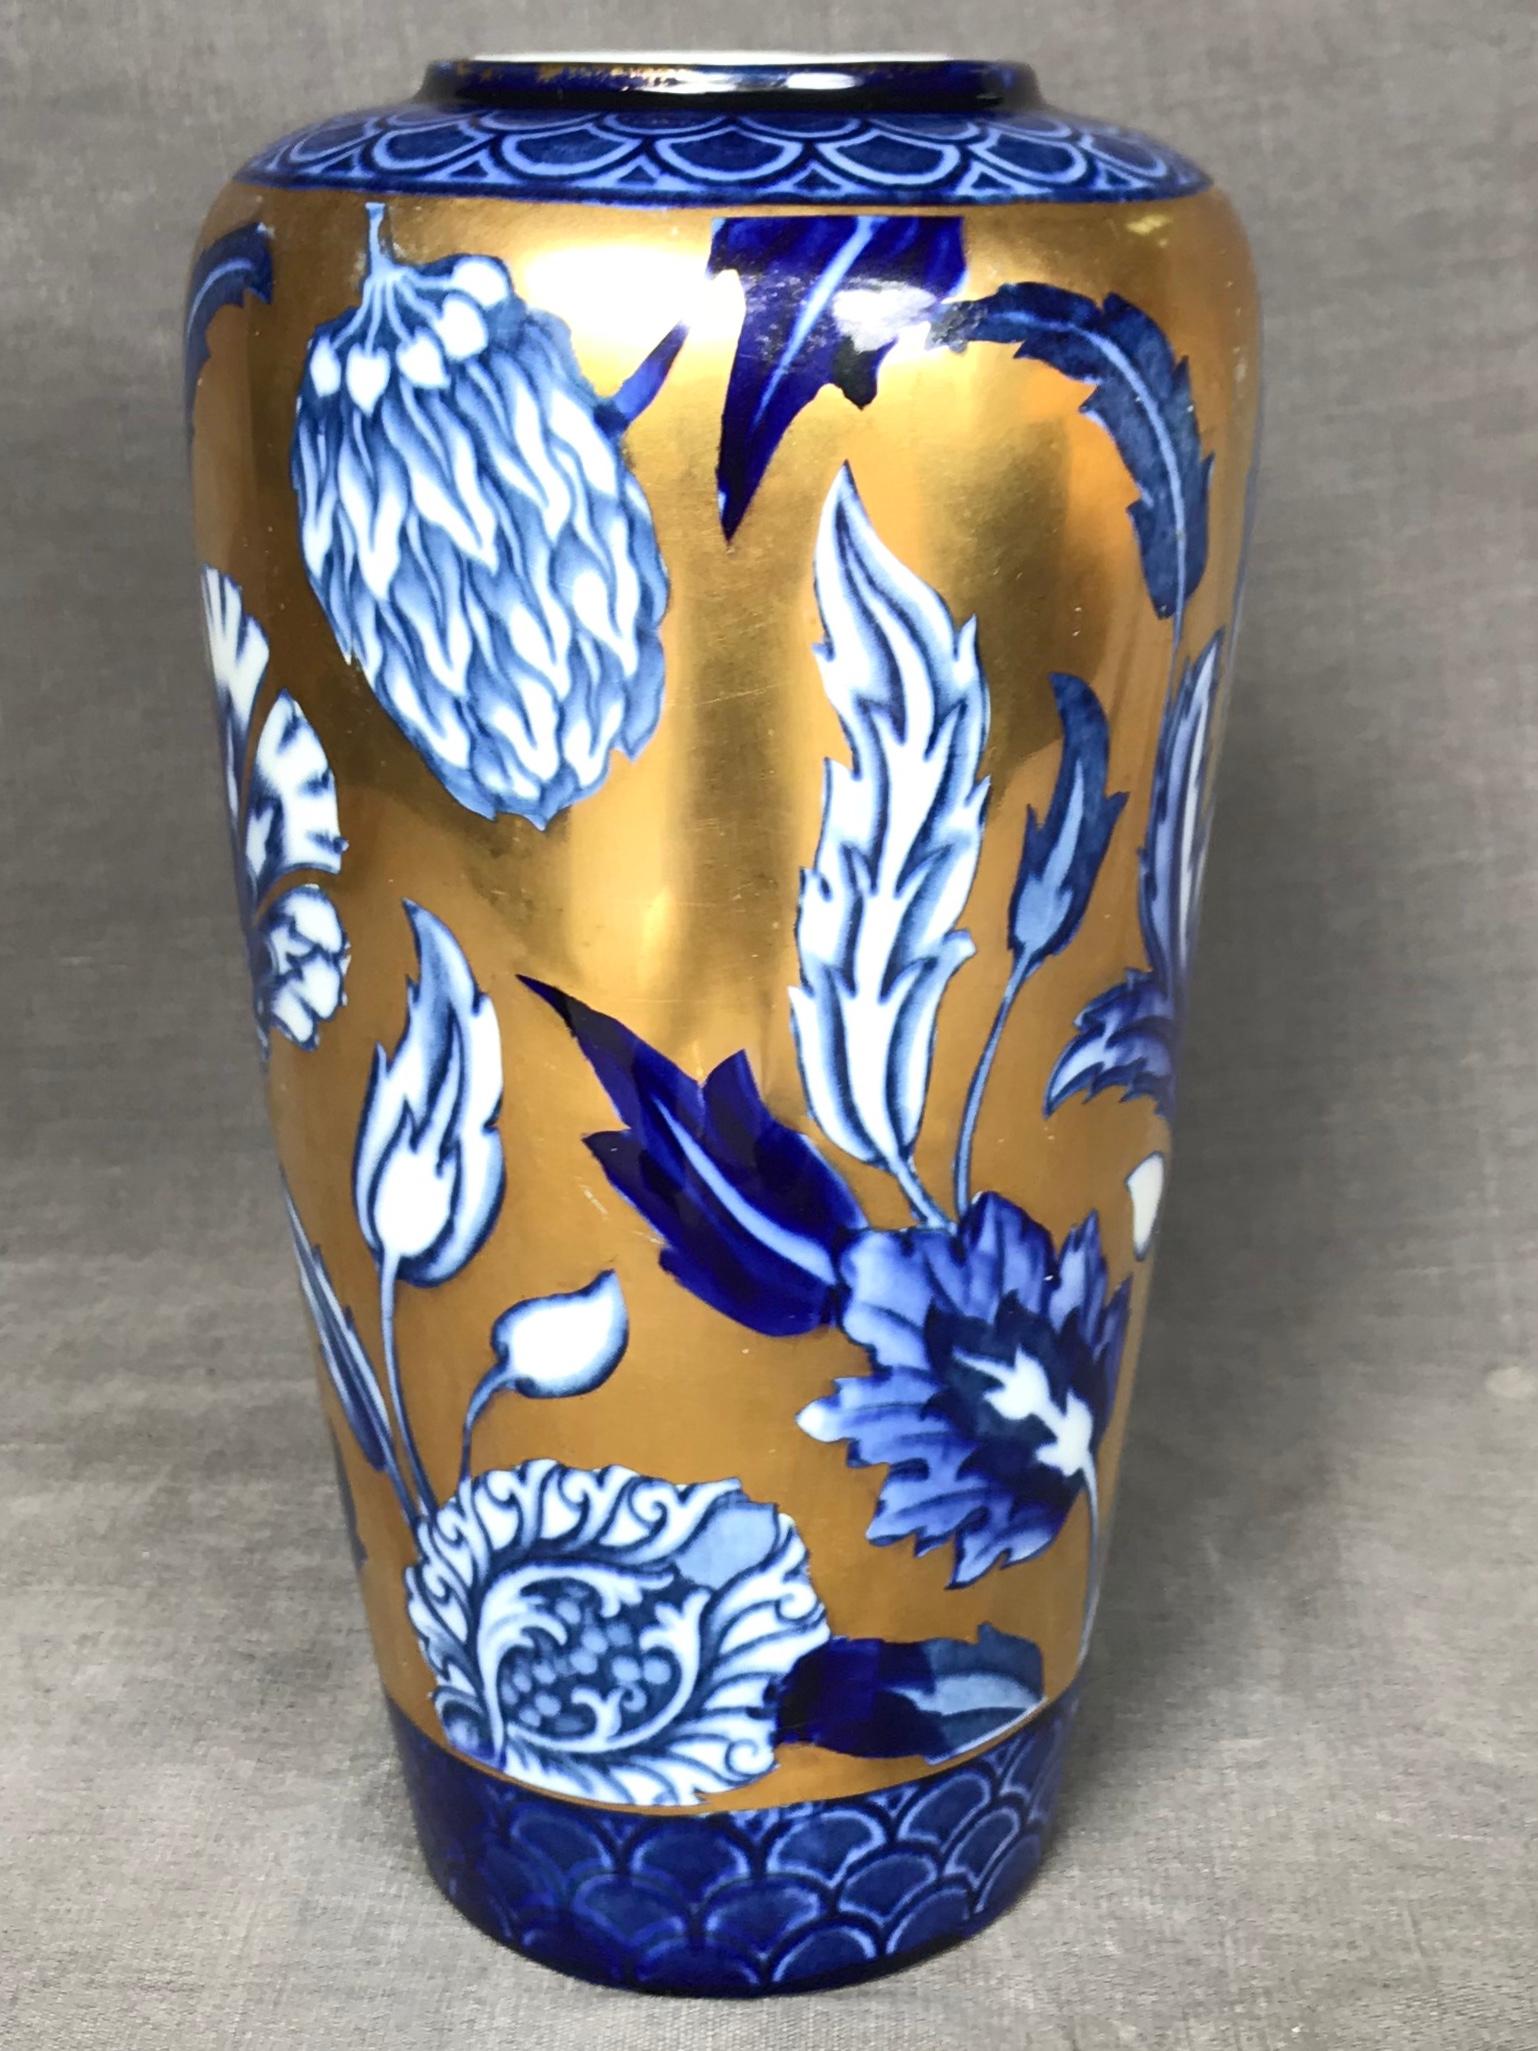 Blue, white and gilt flora vase. Cobalt blue & white floral vase on gilt background with markings for Forrester & Sons, Phoenix Ware in Valencia pattern. England, early 20th century. 
Dimensions: 5